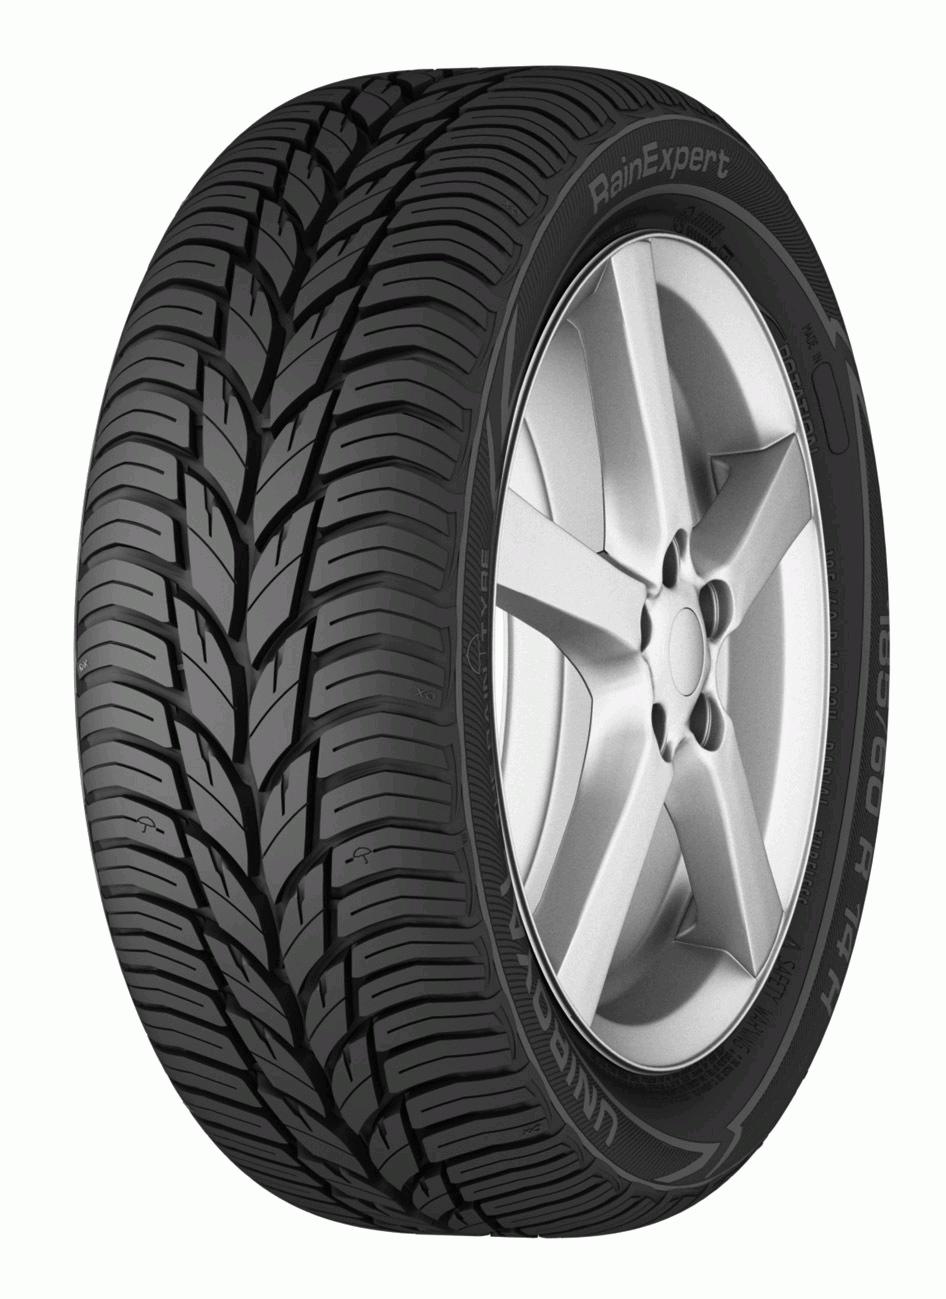 Uniroyal RainExpert - Tyre Tests Reviews and